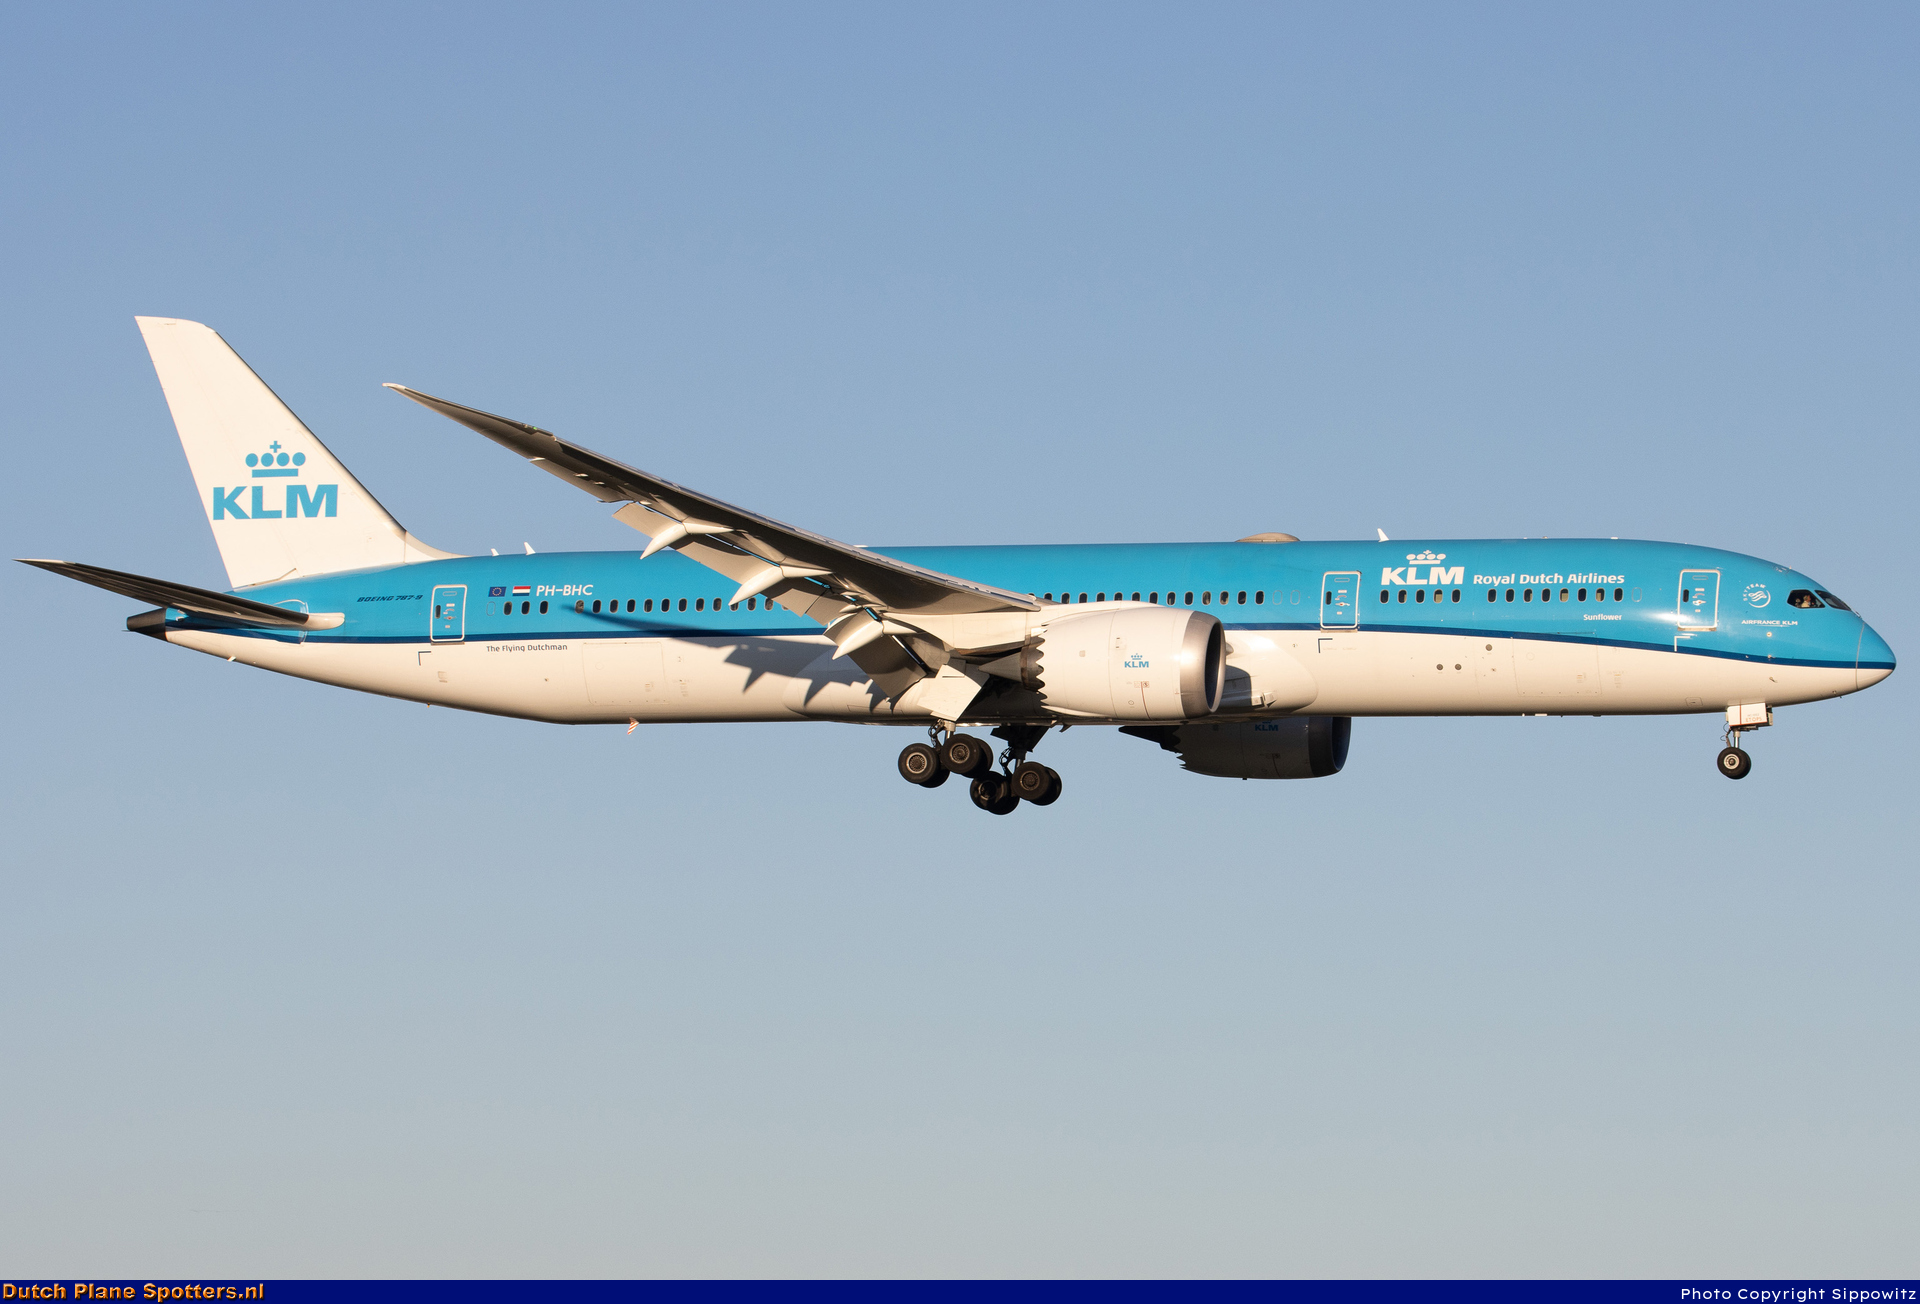 PH-BHC Boeing 787-9 Dreamliner KLM Royal Dutch Airlines by Sippowitz